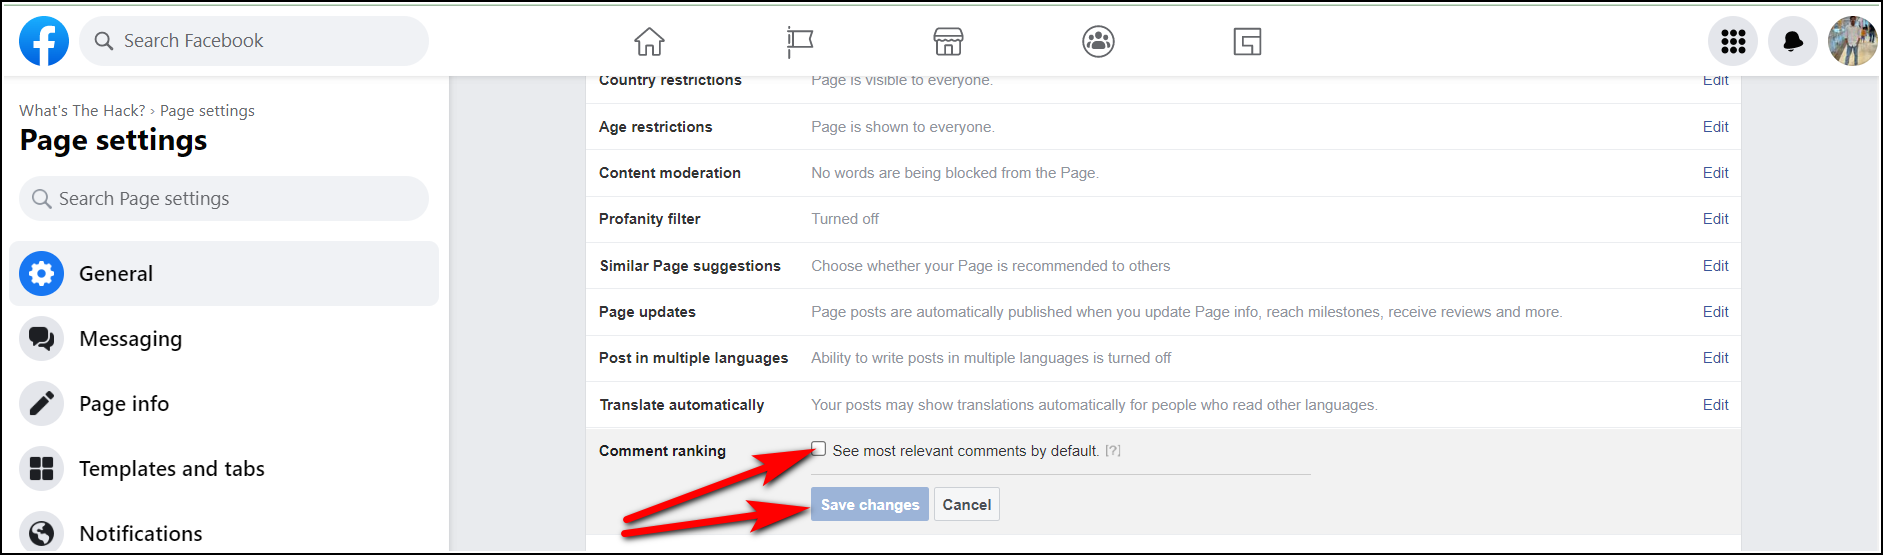 Turn off most relevant comments on Facebook page